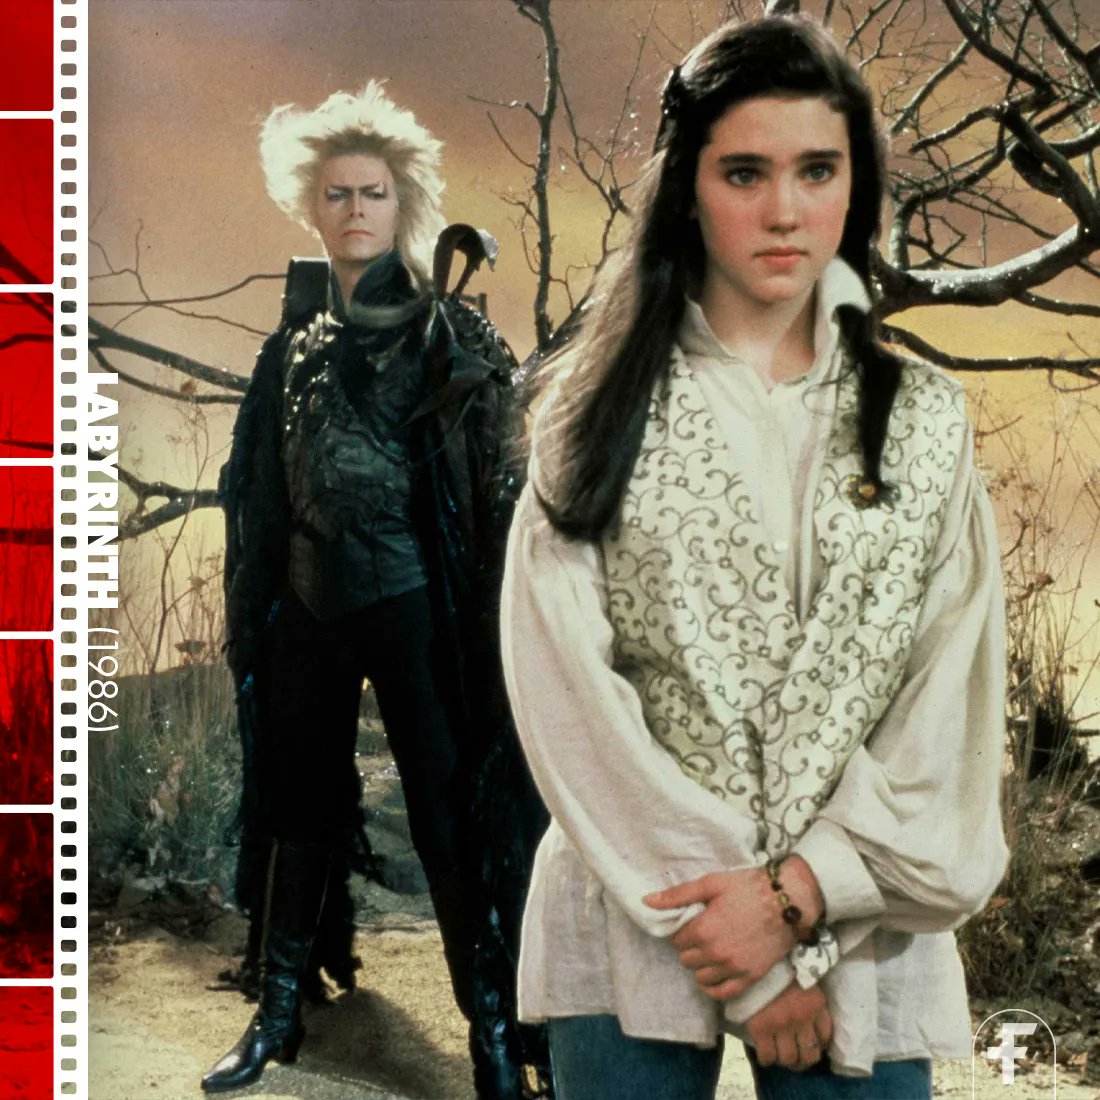 'You have thirteen hours in which to solve the labyrinth, before your baby brother becomes one of us... forever.'

On this day in 1986: Jim Henson's LABYRINTH starring David Bowie and Jennifer Connelly, was released in theaters.